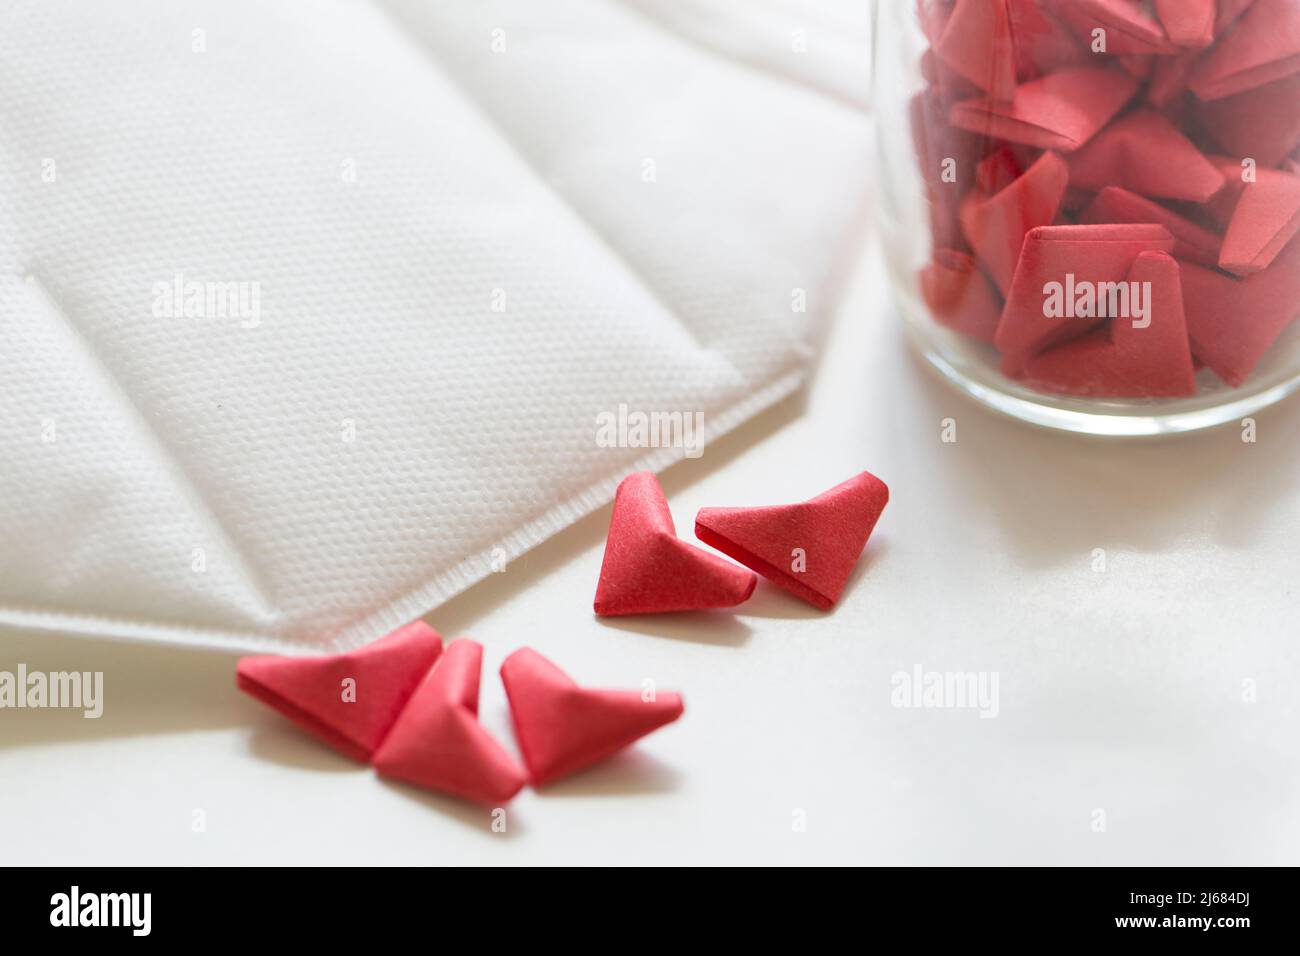 White facemask, Pink and red three-dimensional origami artwork and transparent glass jar - stock photo Stock Photo